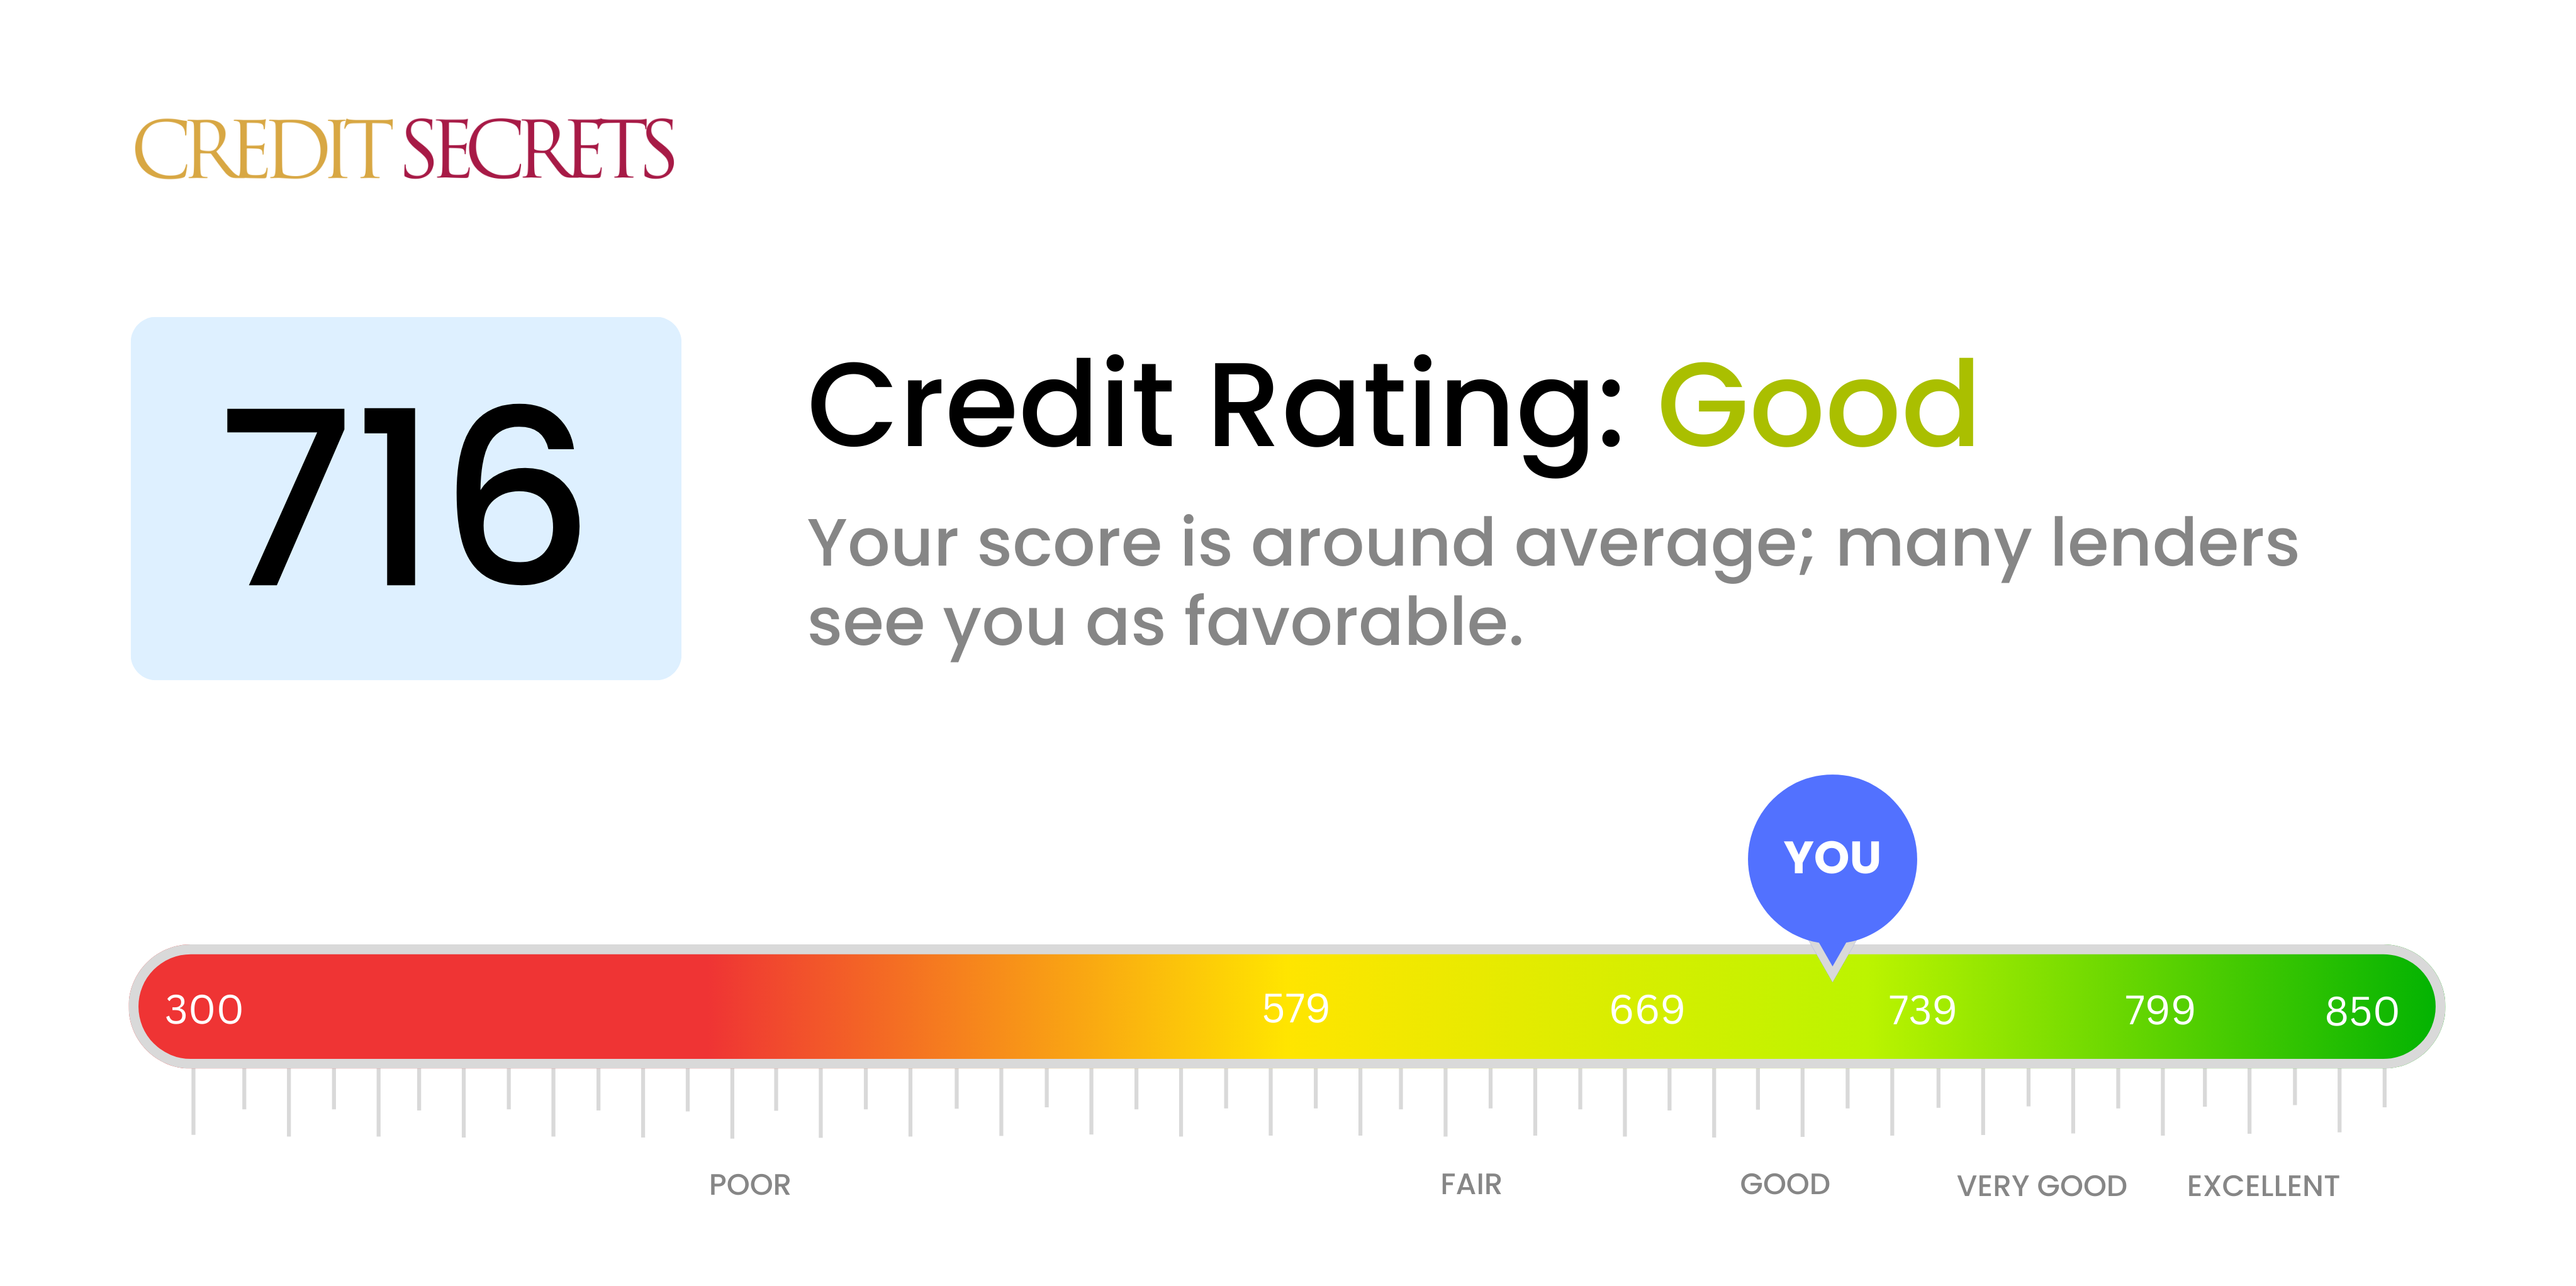 Is 716 a good credit score?